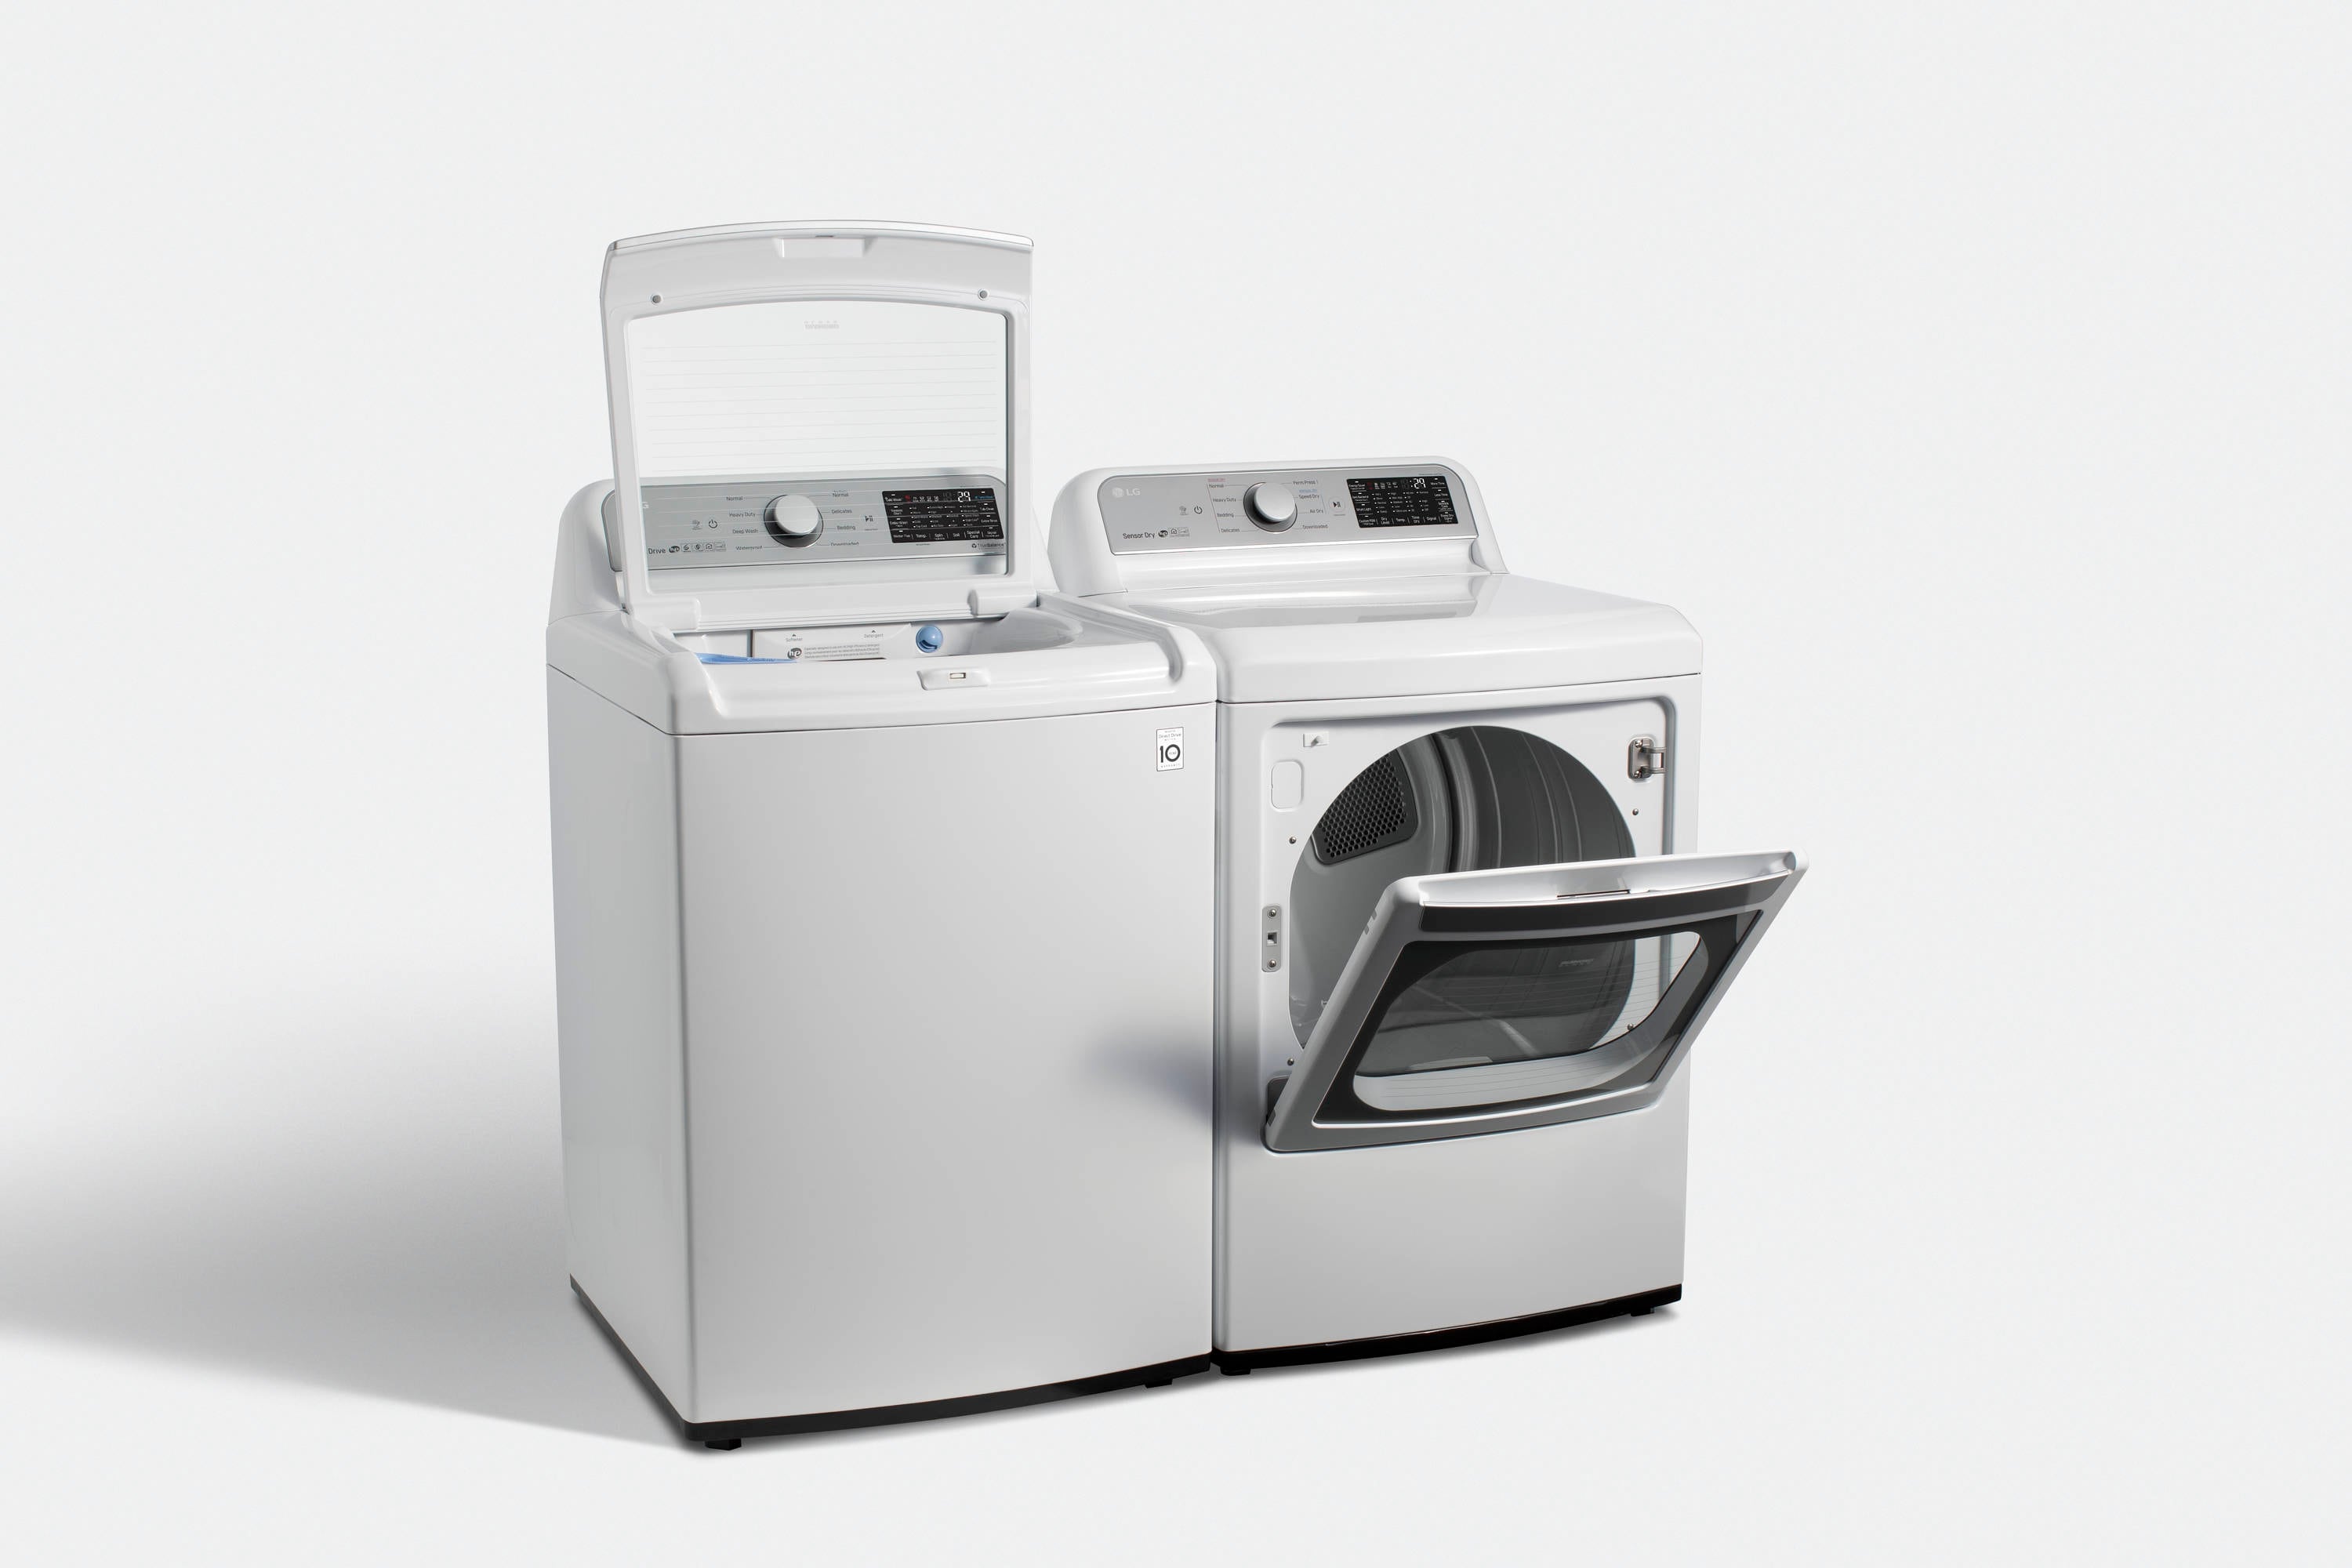 LG DLE7300WE: 7.3 cu. ft. Electric Dryer with Sensor Dry